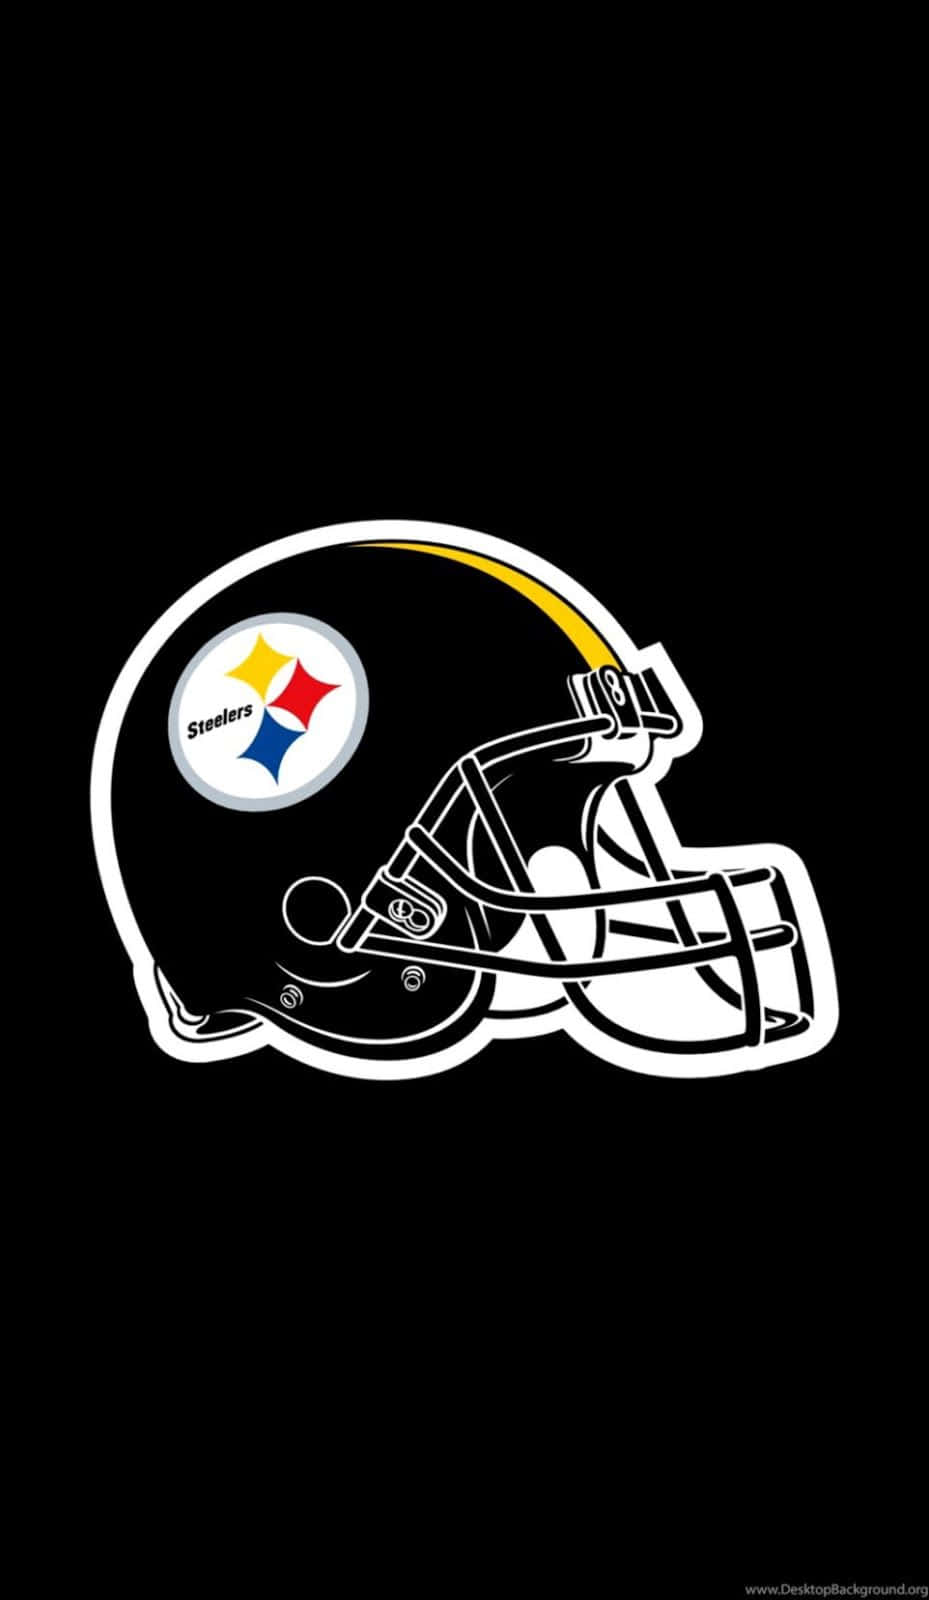 An Iconic Pittsburgh Steelers Logo, Proudly Displayed Background